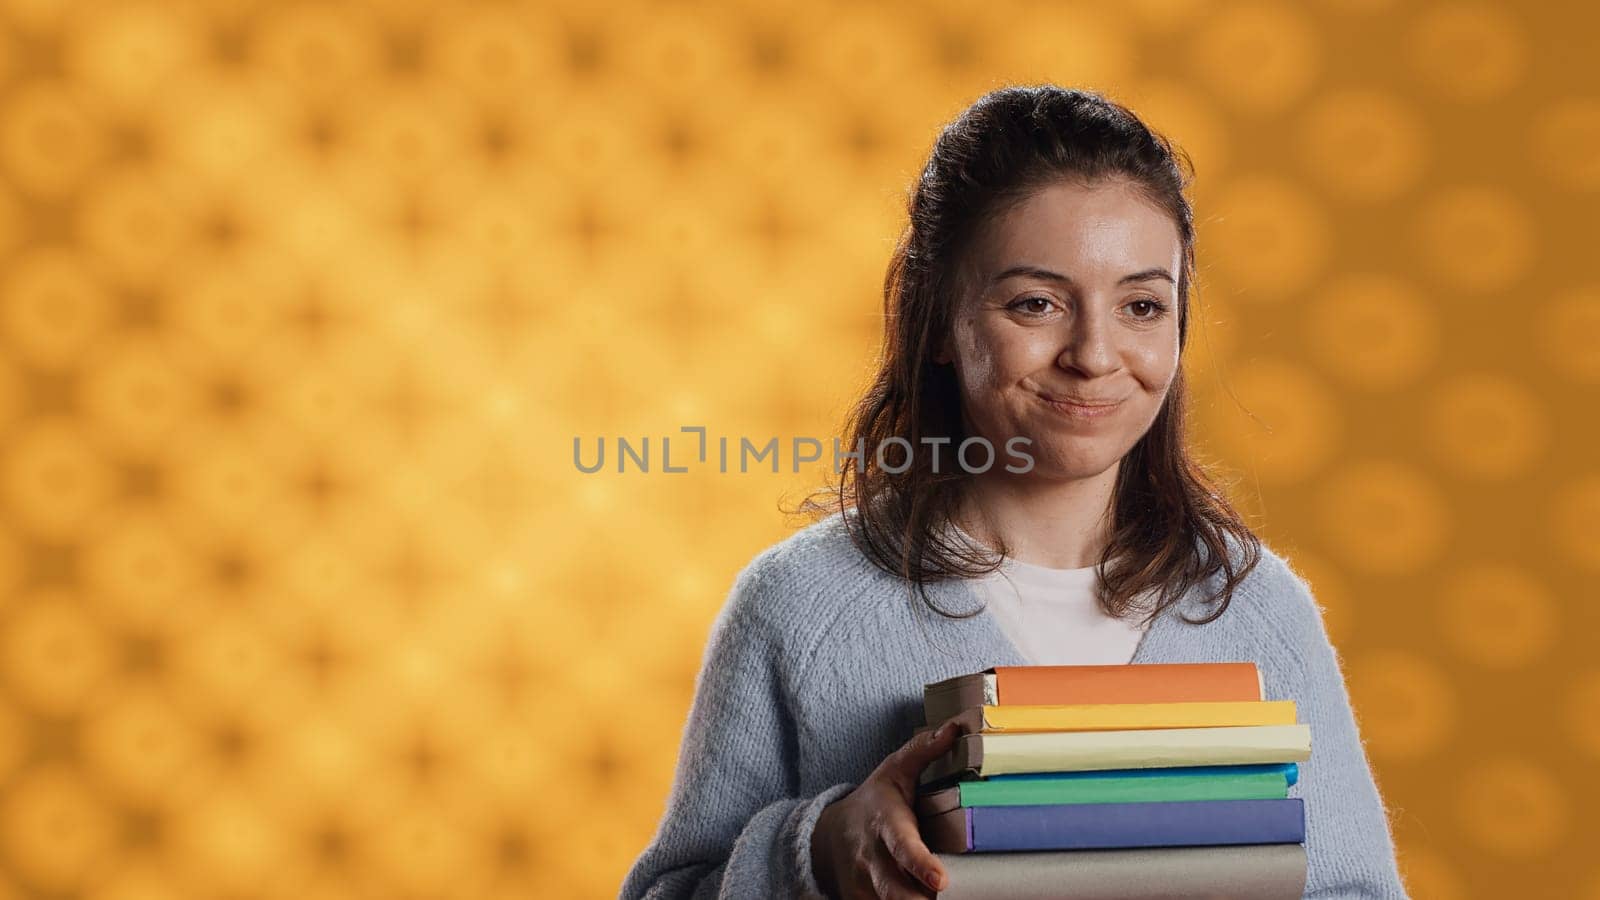 Portrait of smiling woman holding stack of books, doing salutation hand gesture by DCStudio